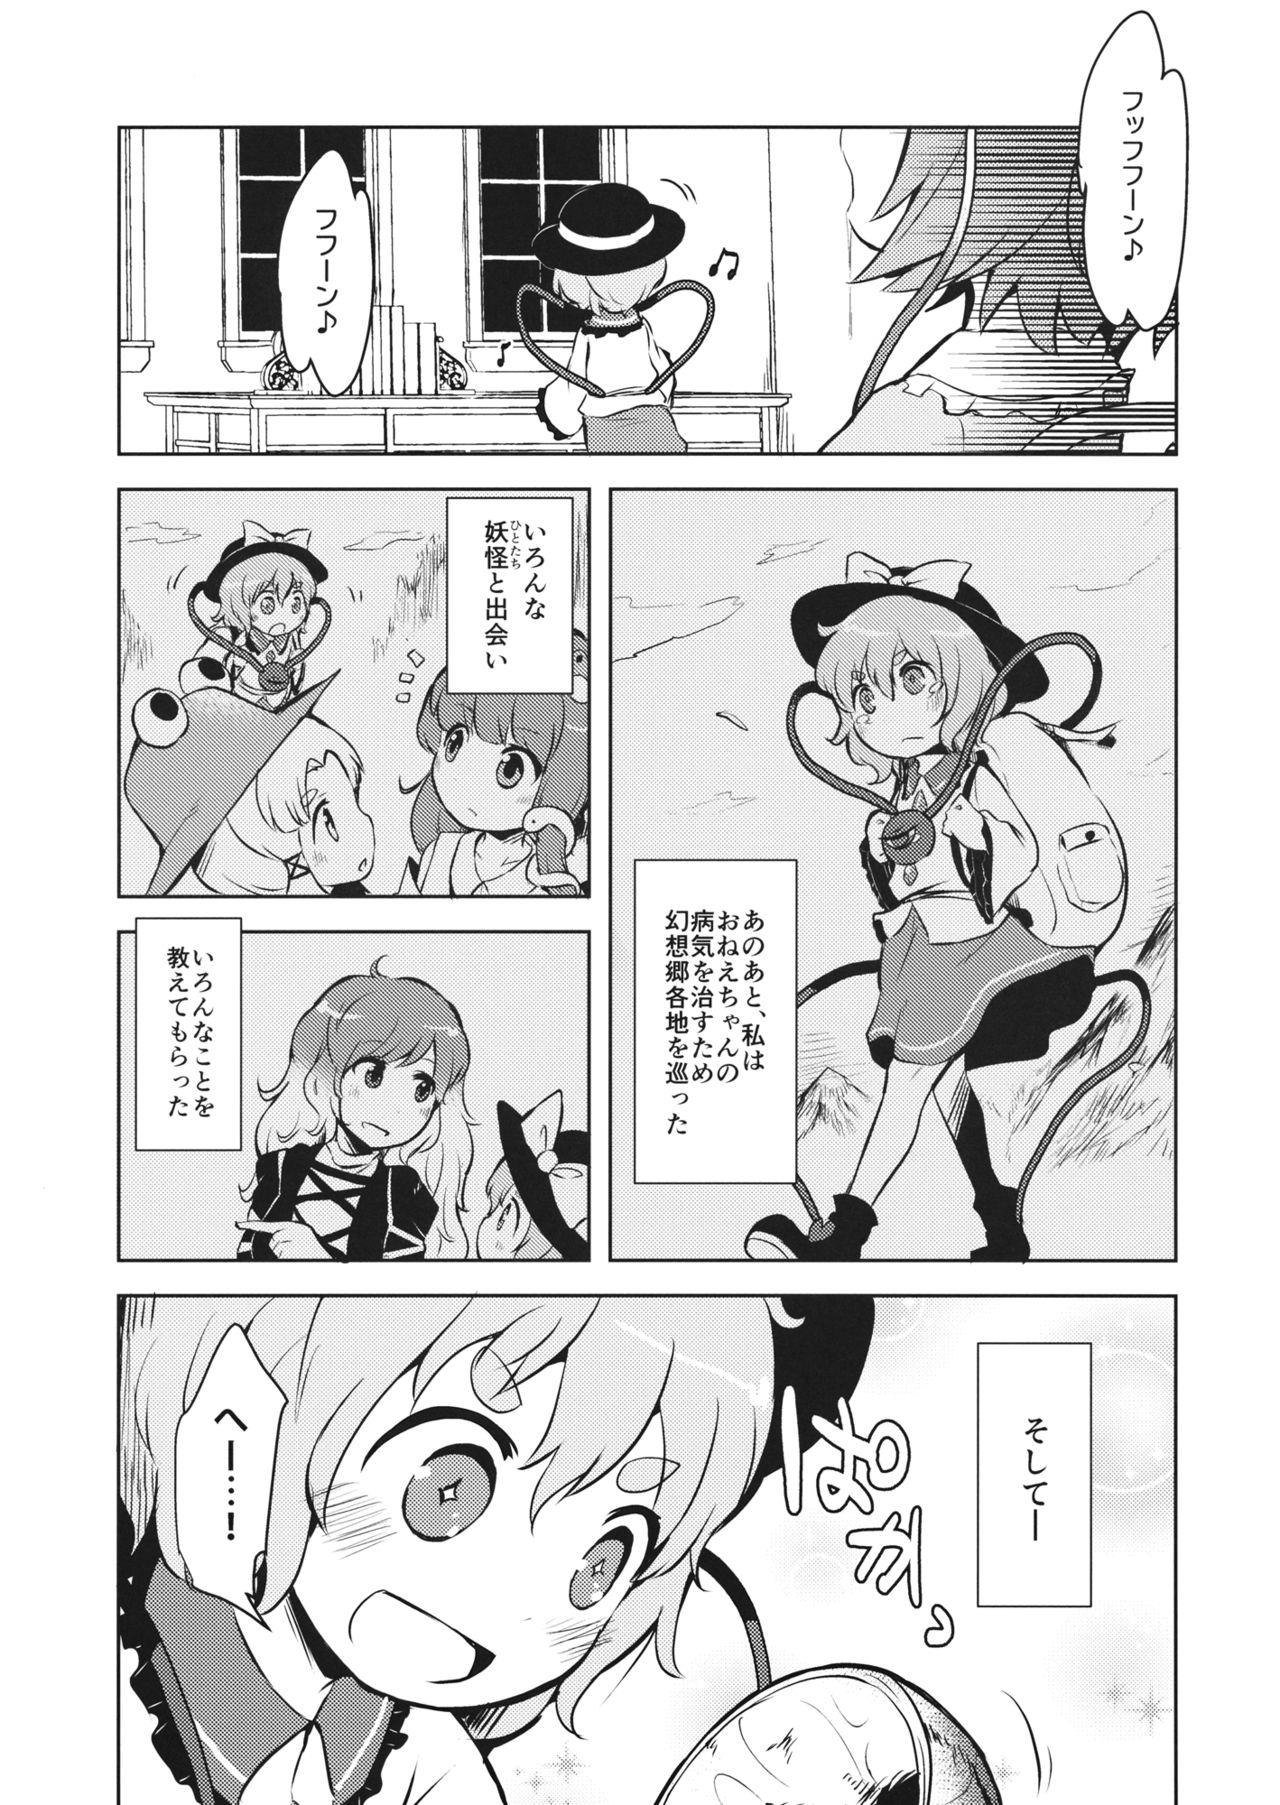 Cfnm FREAKS OUT! - Touhou project Babes - Page 8